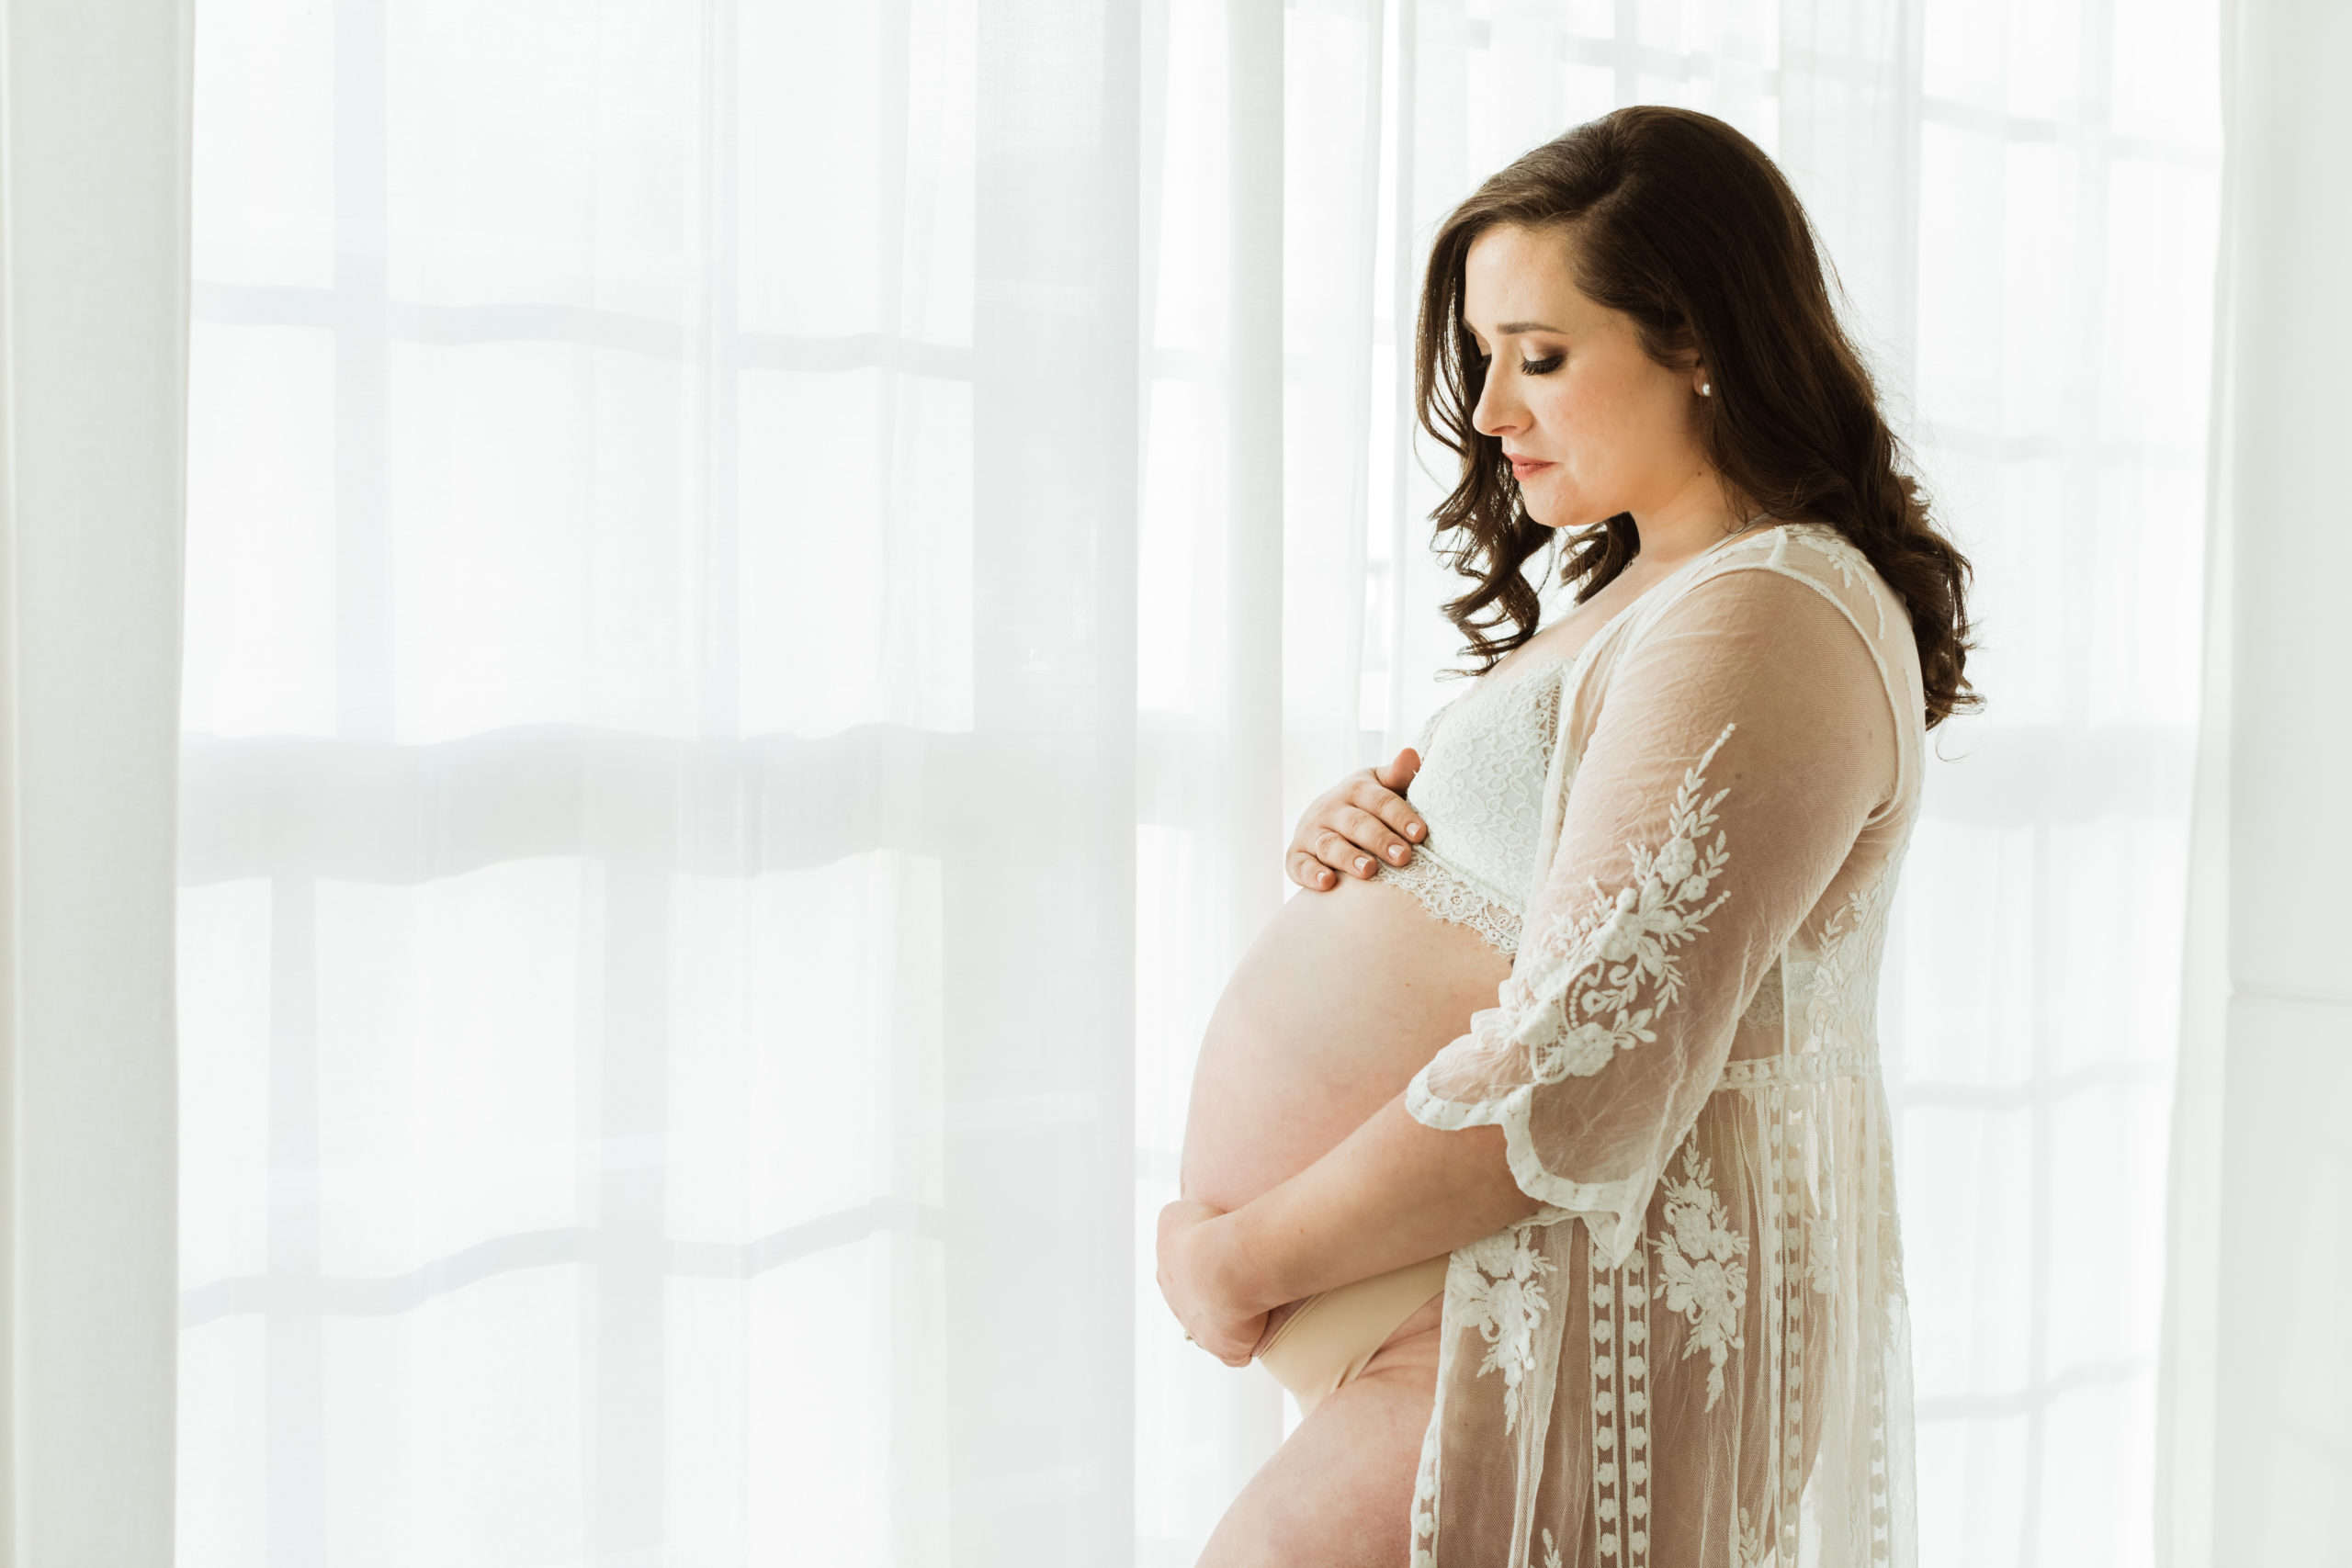 Pregnant mama looking at belly near window wearing a see through nightgown with belly exposed. Indoor natural light photography.